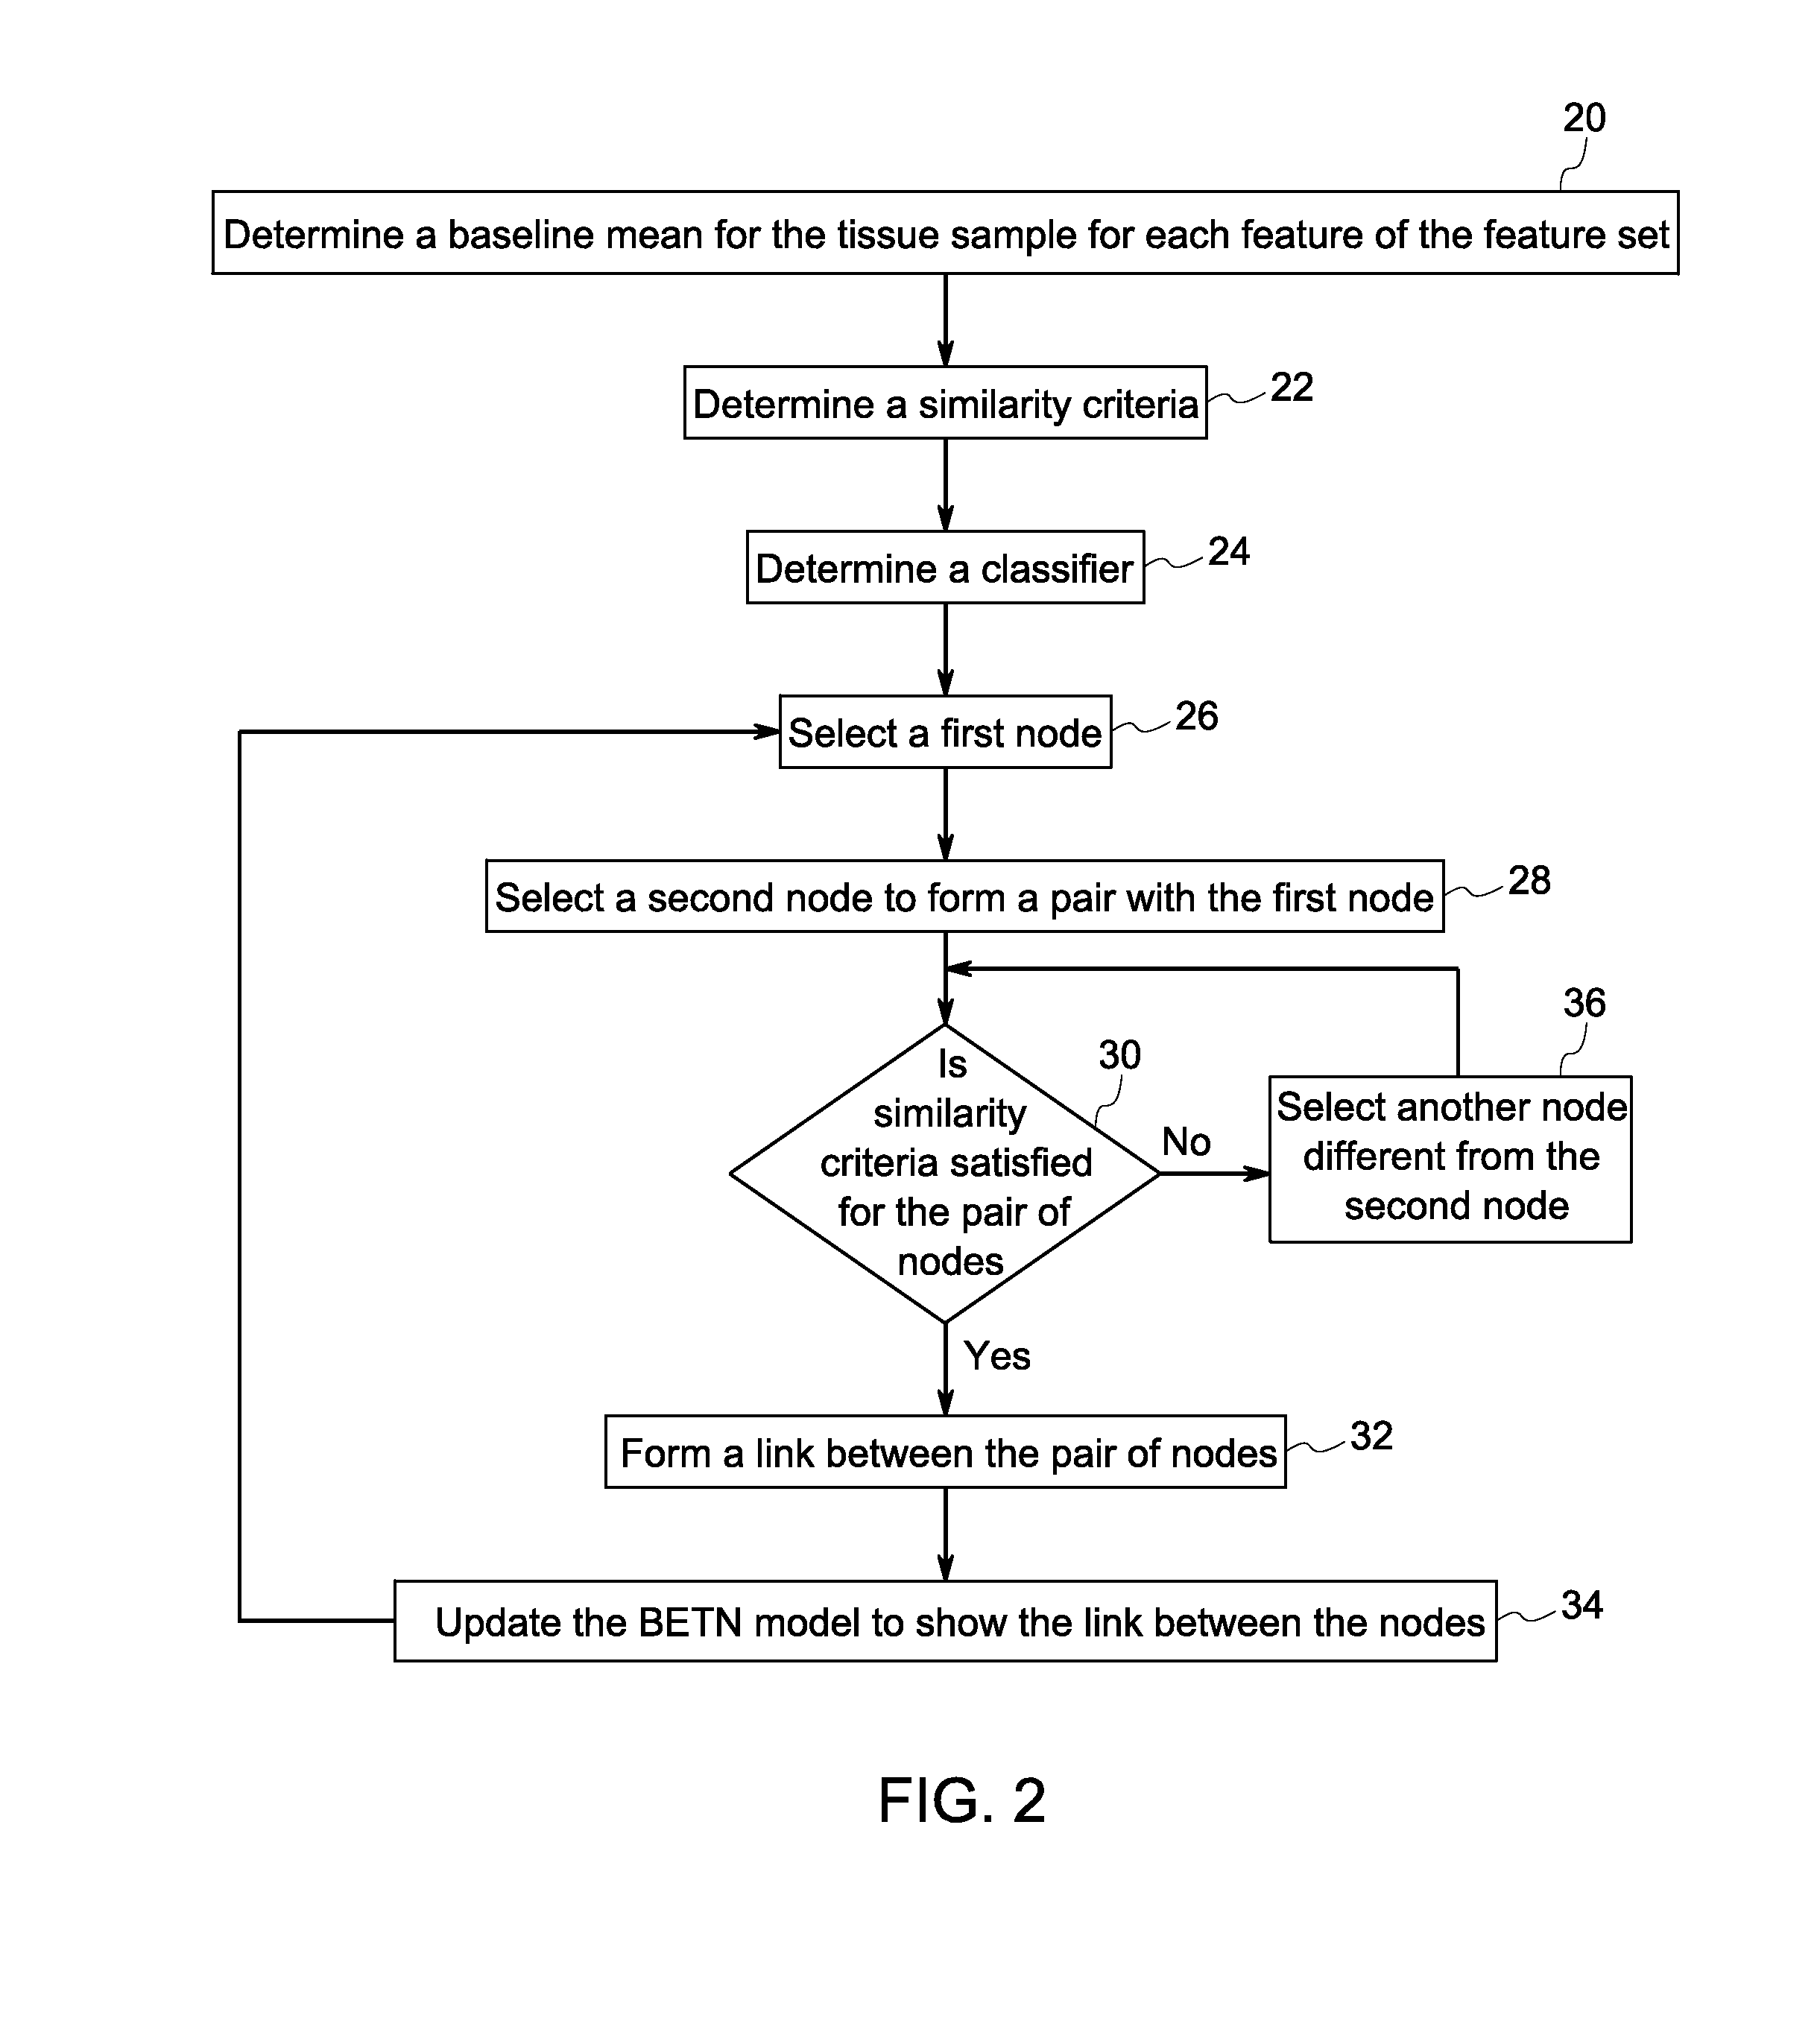 Systems and methods for tissue classification